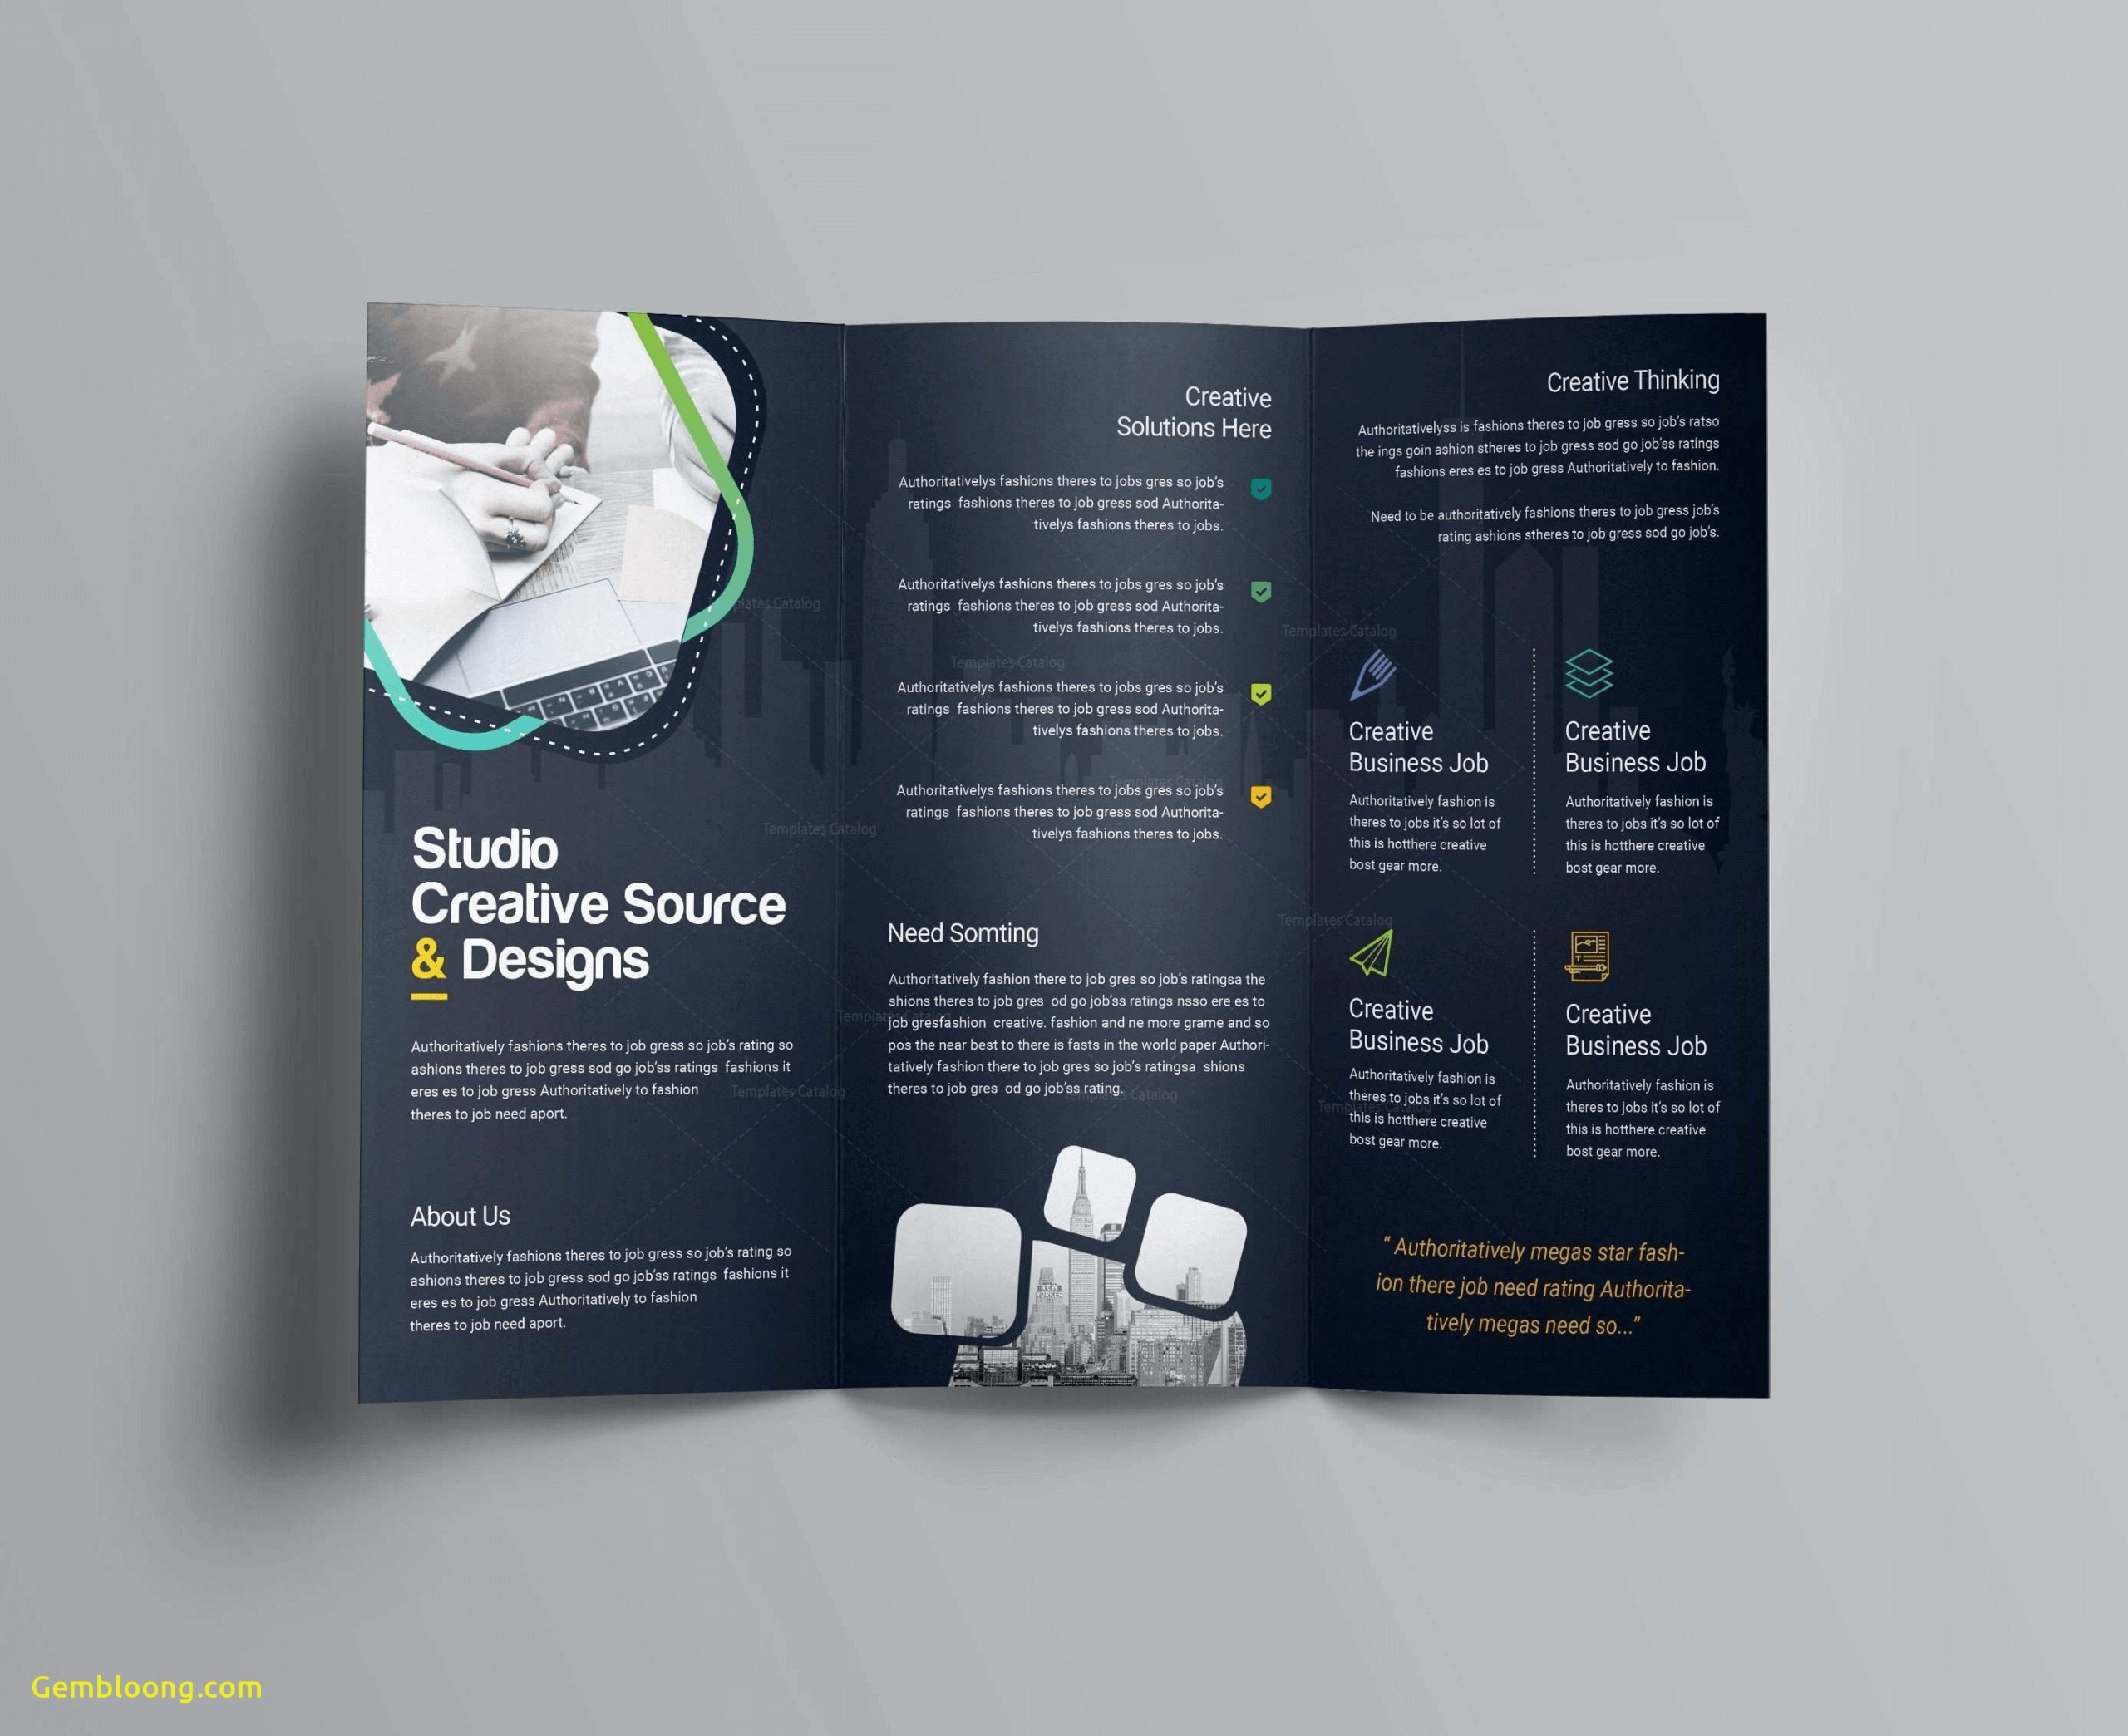 026 Brochure Design Templates Free Download For Word Poster Within Online Free Brochure Design Templates